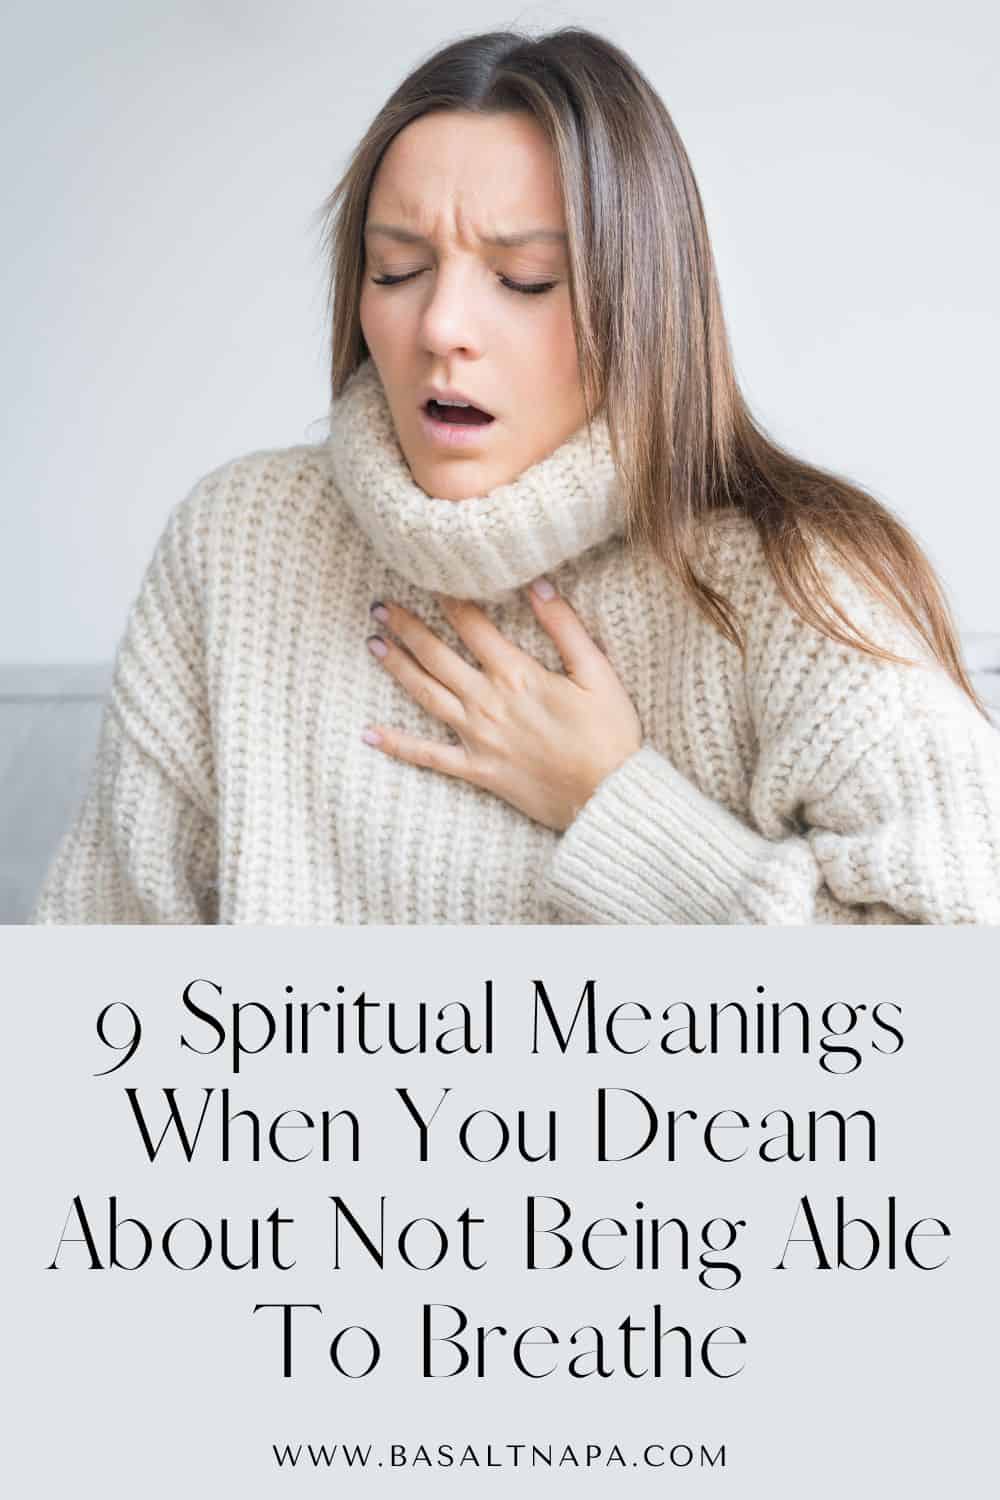 9 Spiritual Meanings When You Dream About Not Being Able To Breathe